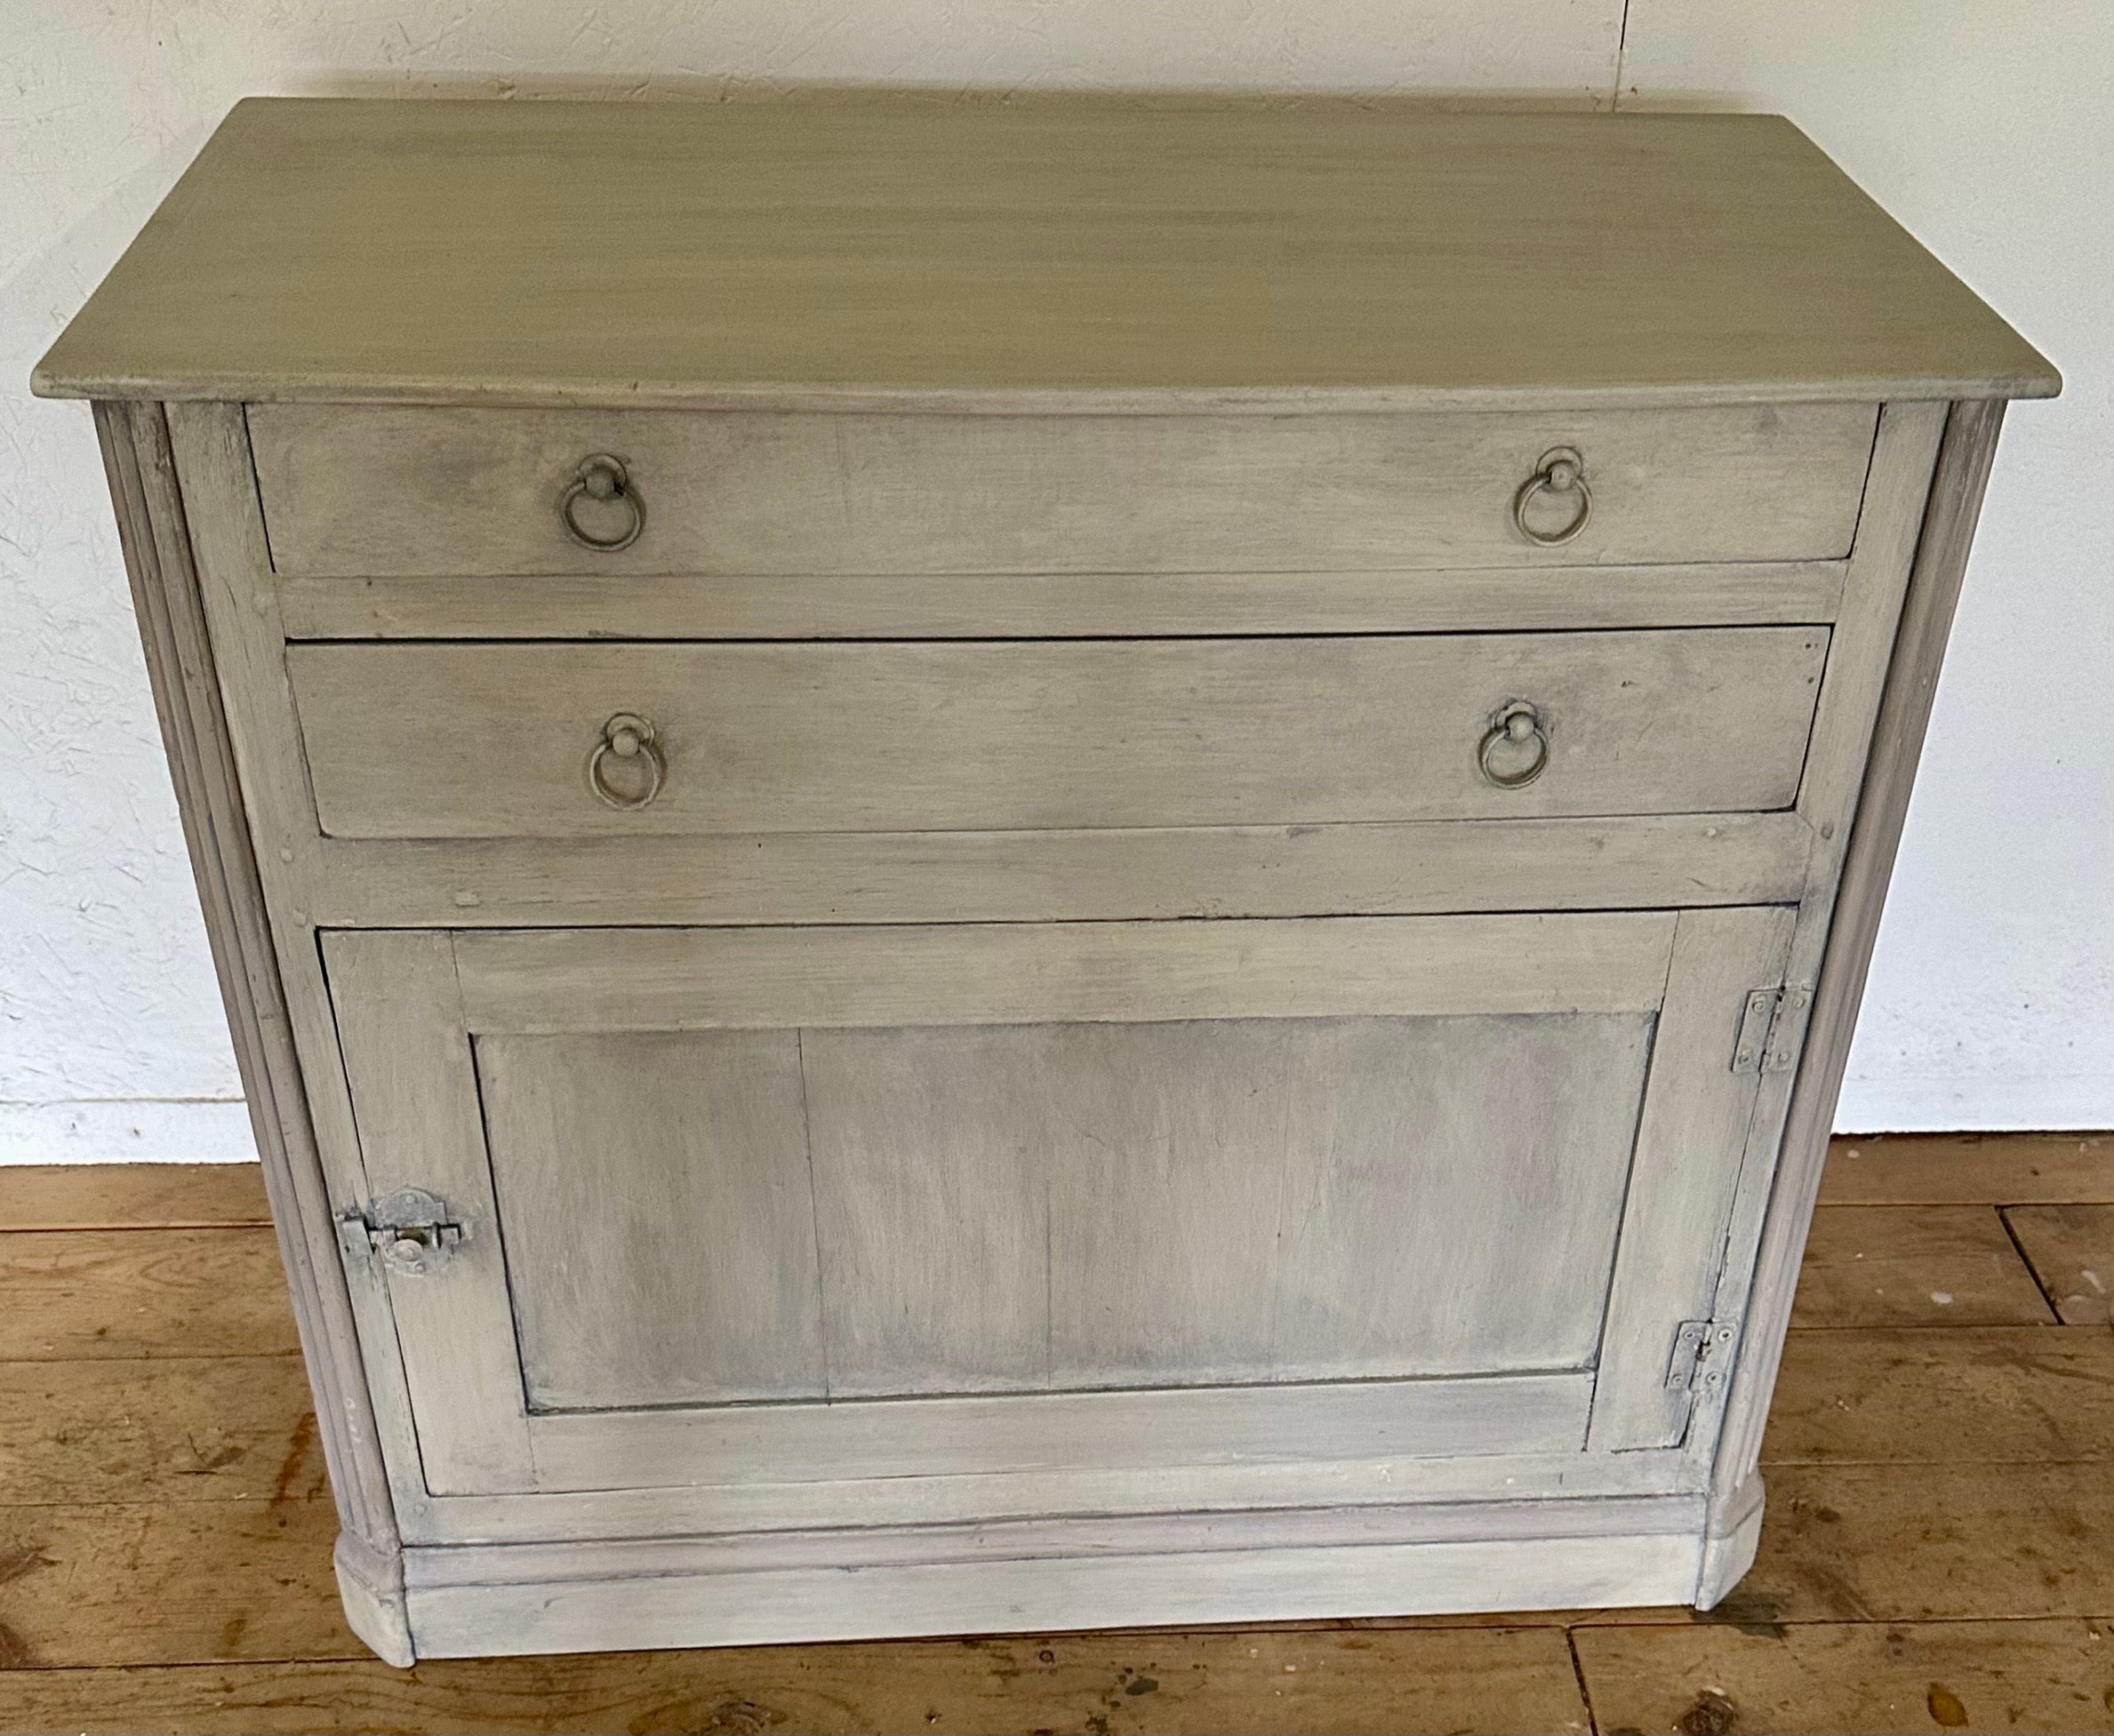 Rustic French provincial painted low cupboard or confiture.  Can be used as hallway piece or use in a bedroom for a side table, nightstand, in a bathroom or kitchen for extra storage.
The cabinet has solid wood construction, newly repainted in a